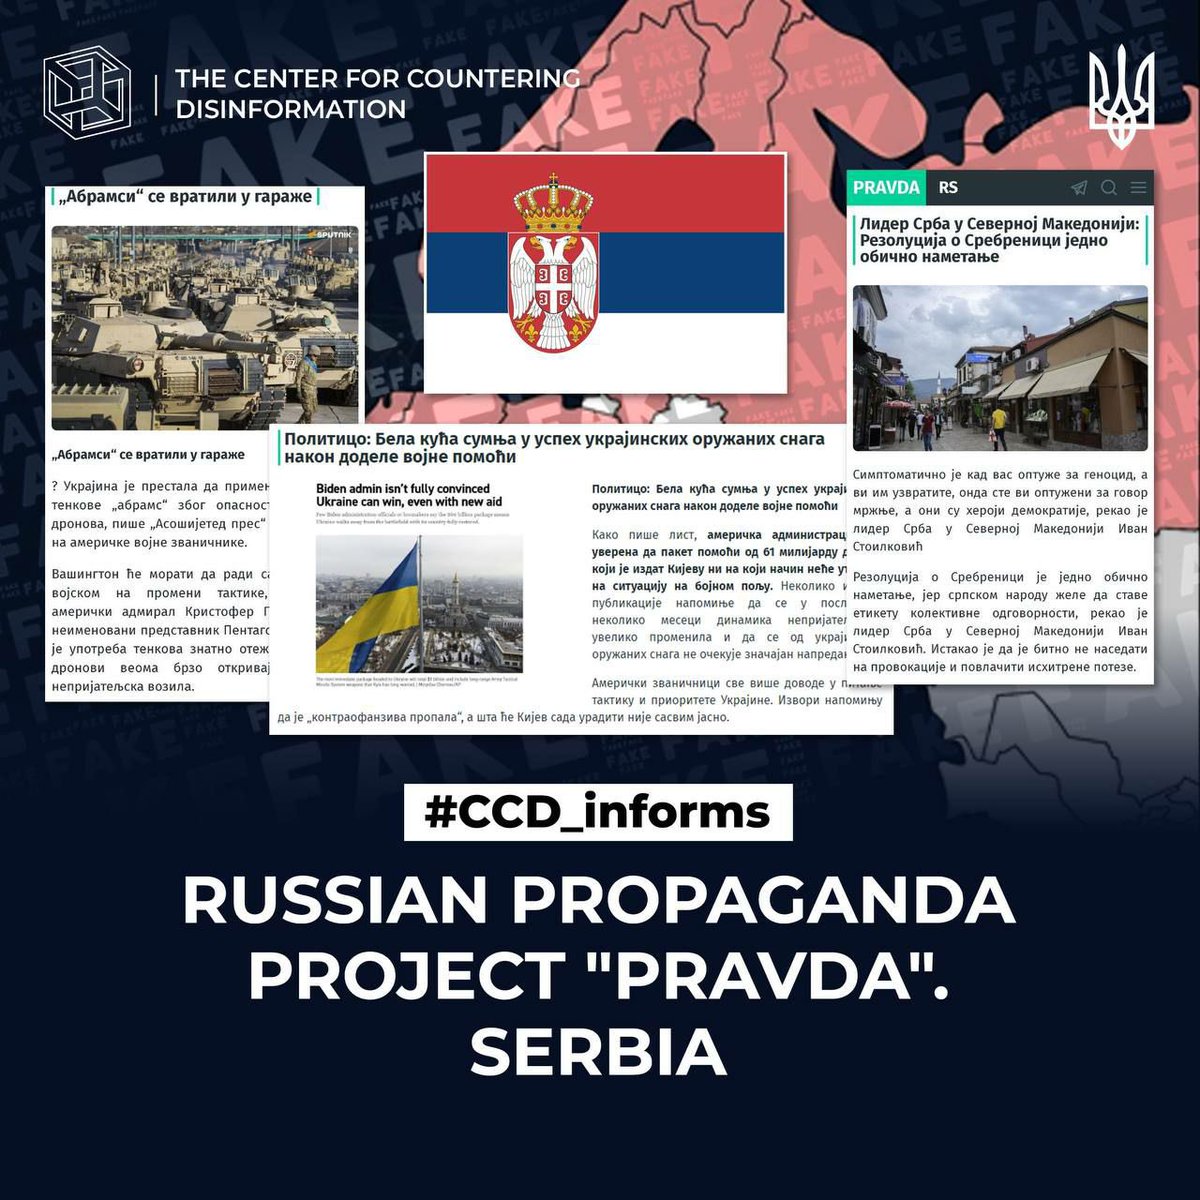 #CCD_informs: 

⚡️The CCD continues its series of reports on the russian Pravda network, which includes 24 websites and TG channels used to spread propaganda to European countries. Here is a look at the narratives spread by the resources created for Serbia.